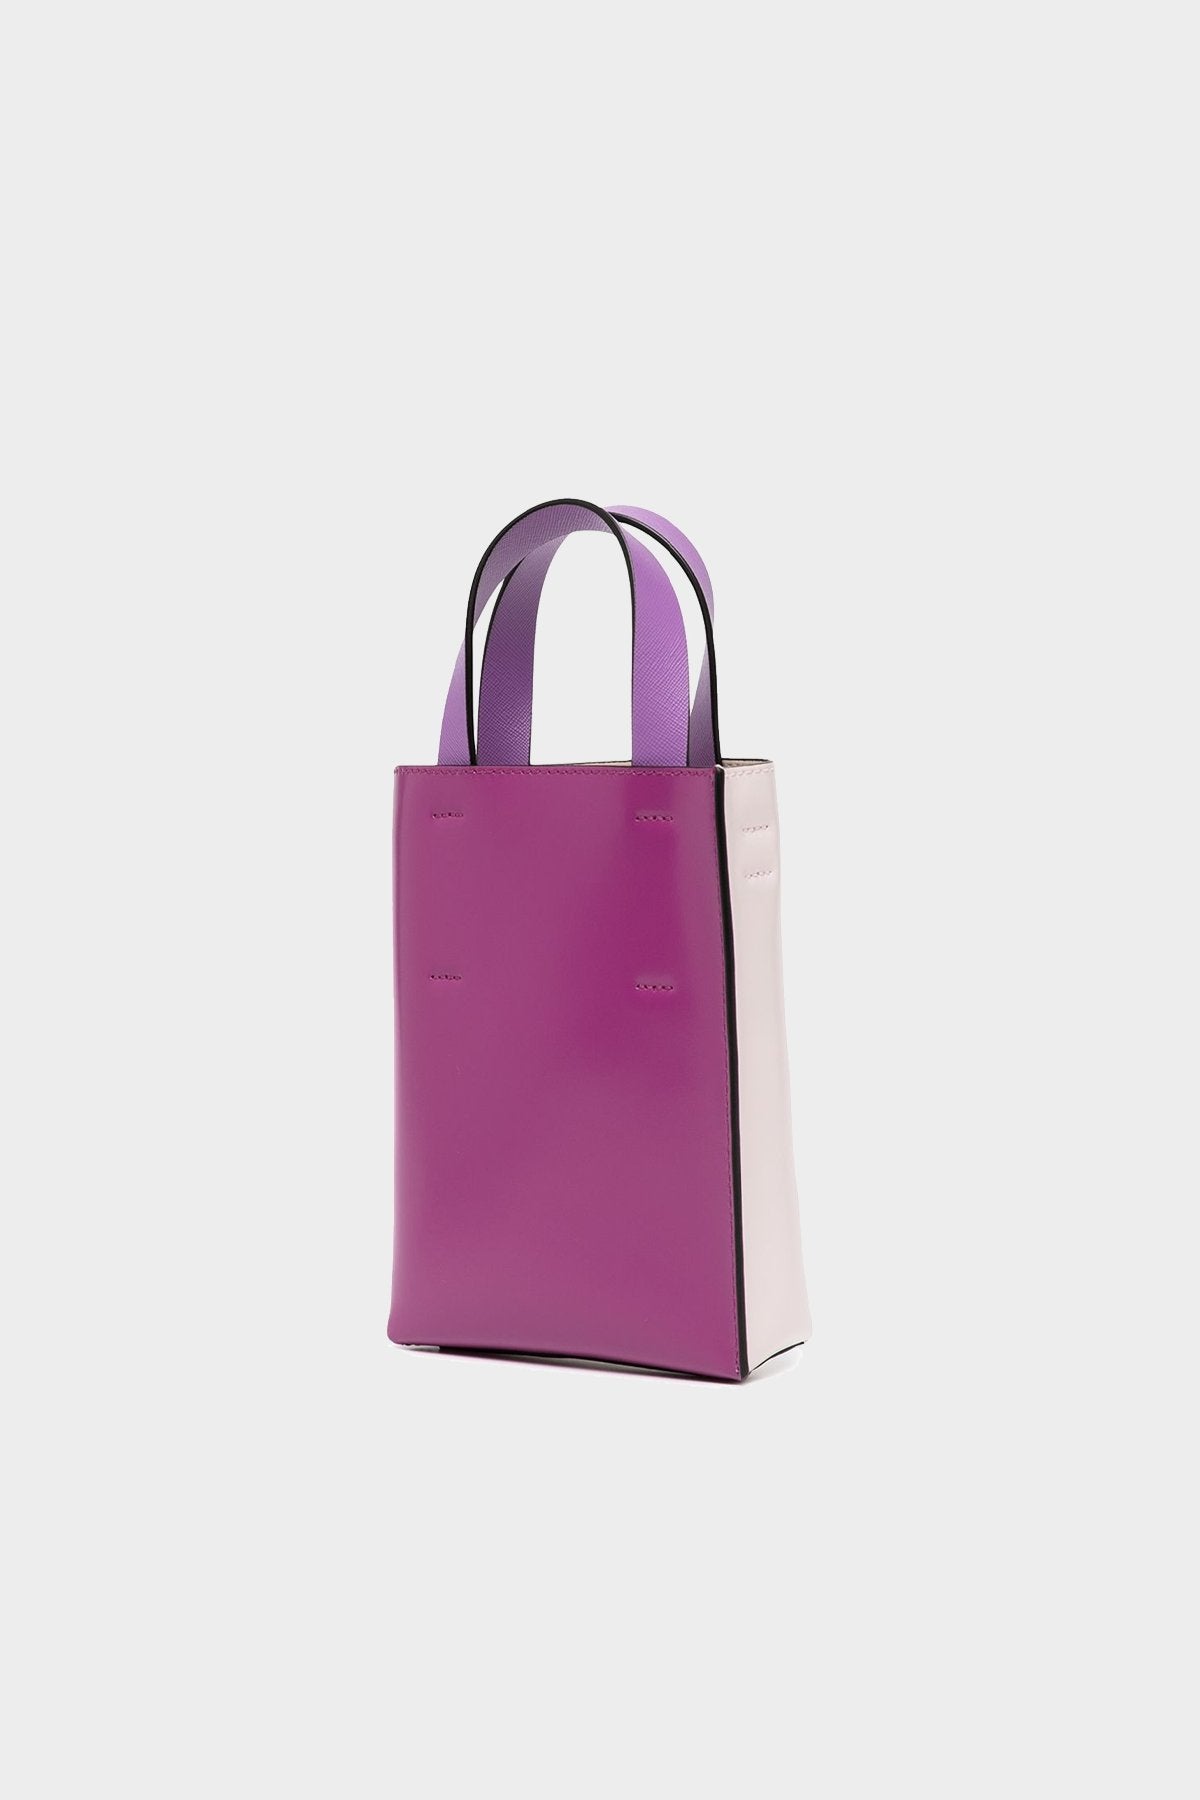 Museo Leather Nano Bag in Light Pink and Purple - shop-olivia.com